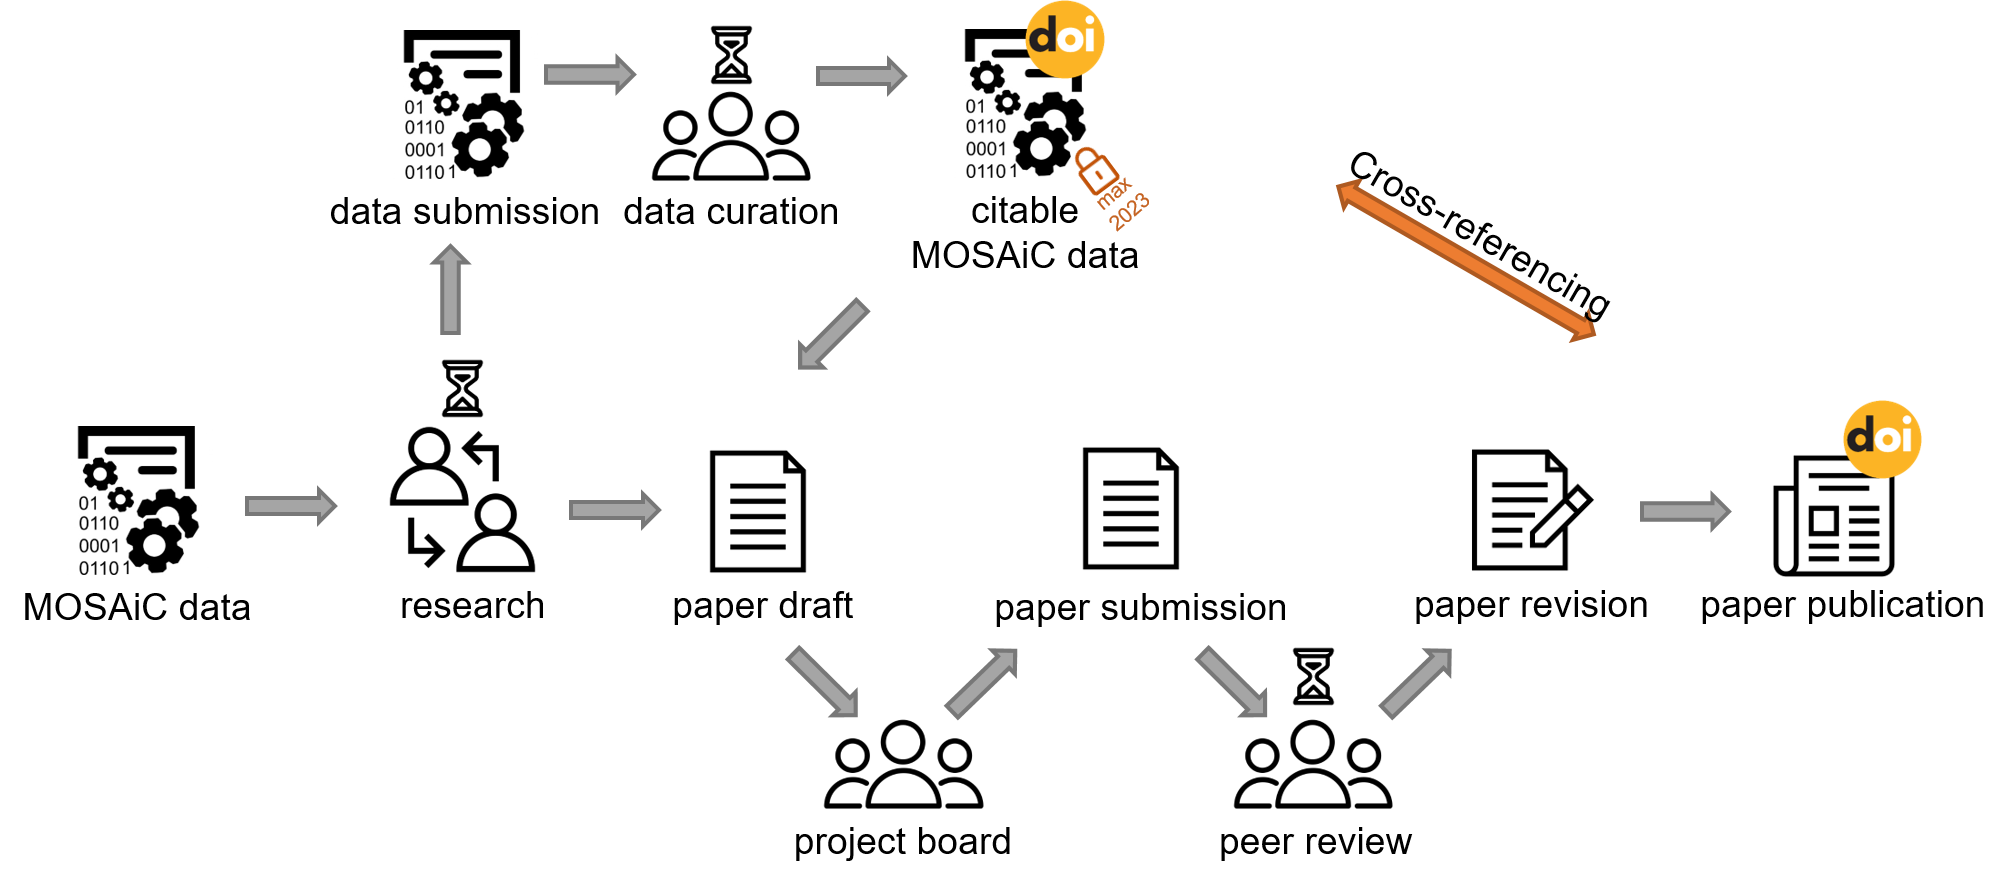 Suggested data publication workflow